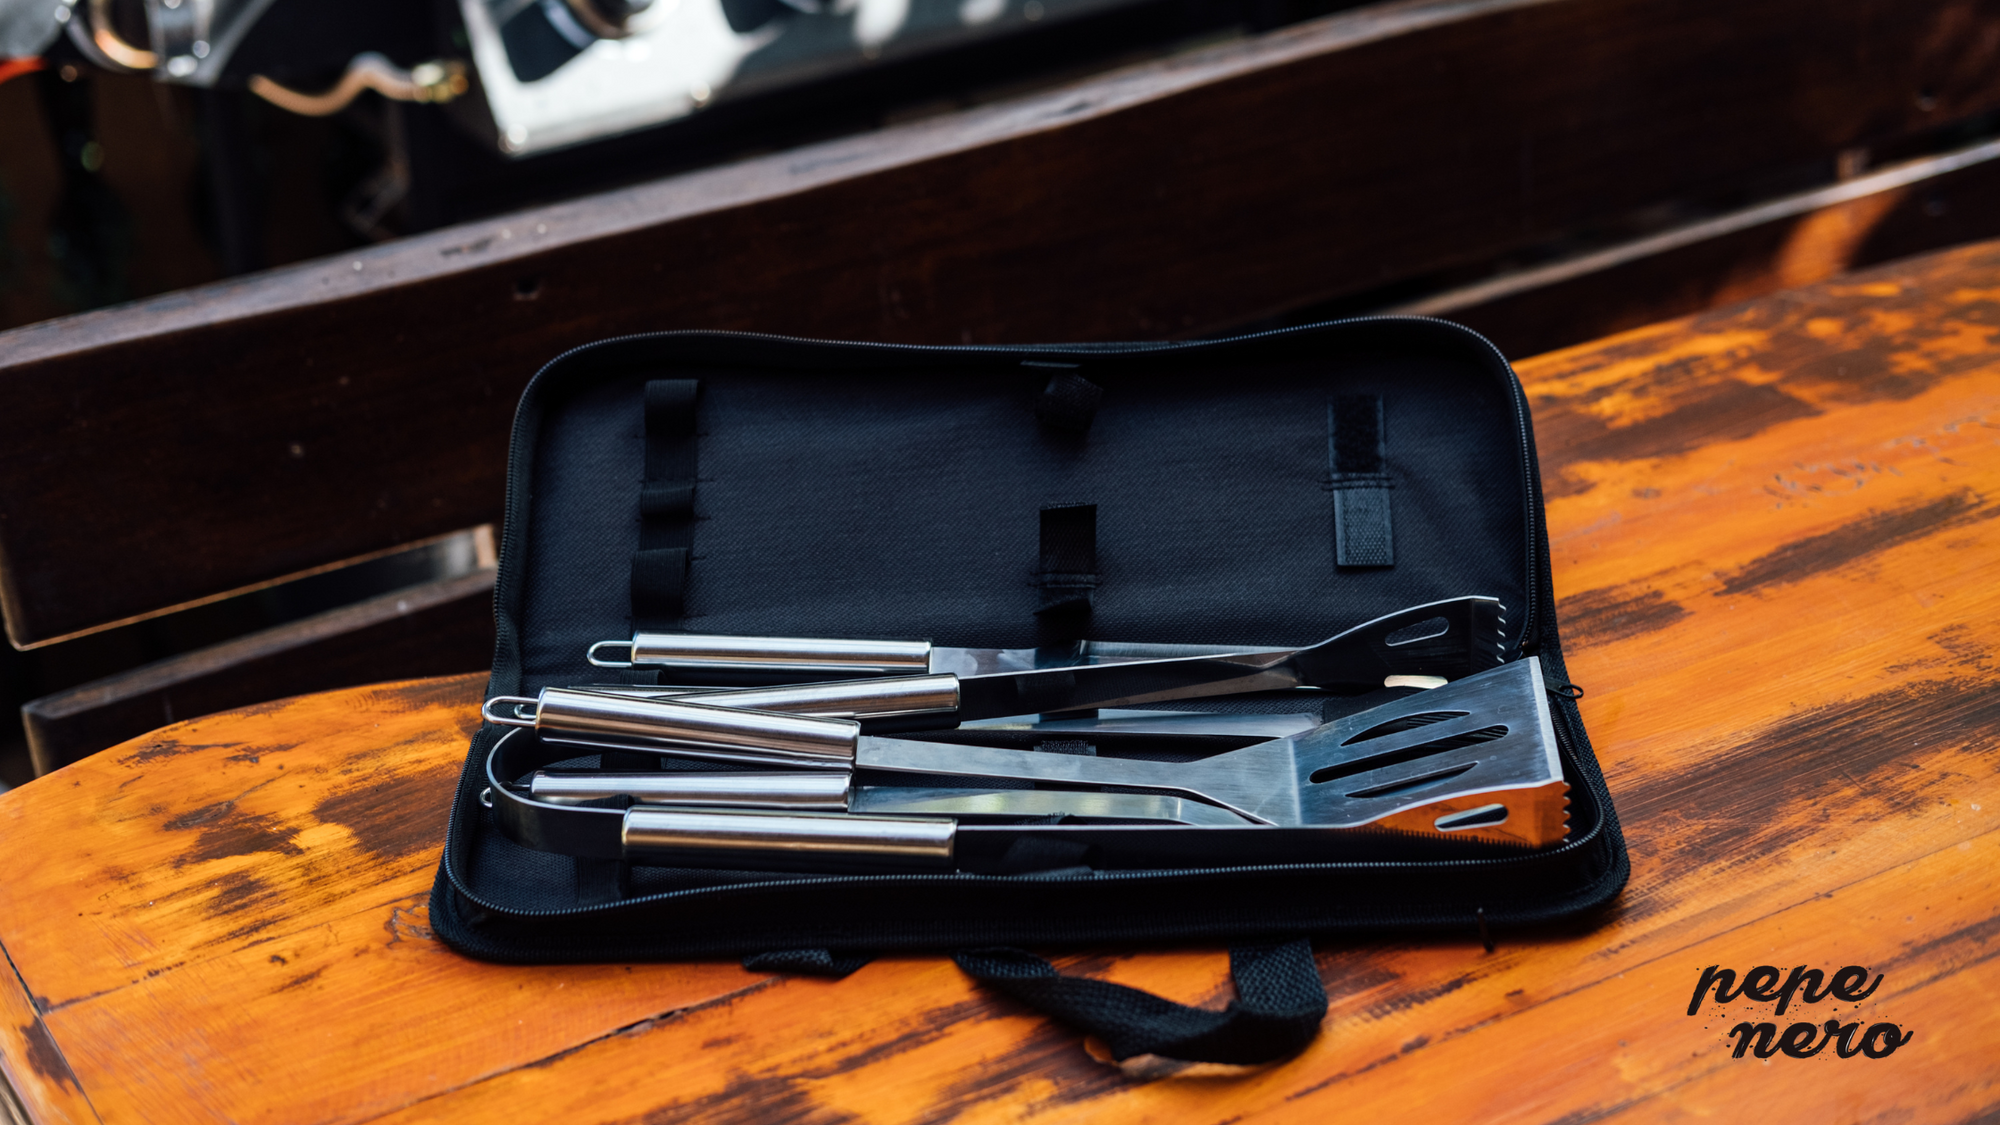 How to Store Grill Tools: 5 Simple Ideas for Storing Your Grilling Tools at Home